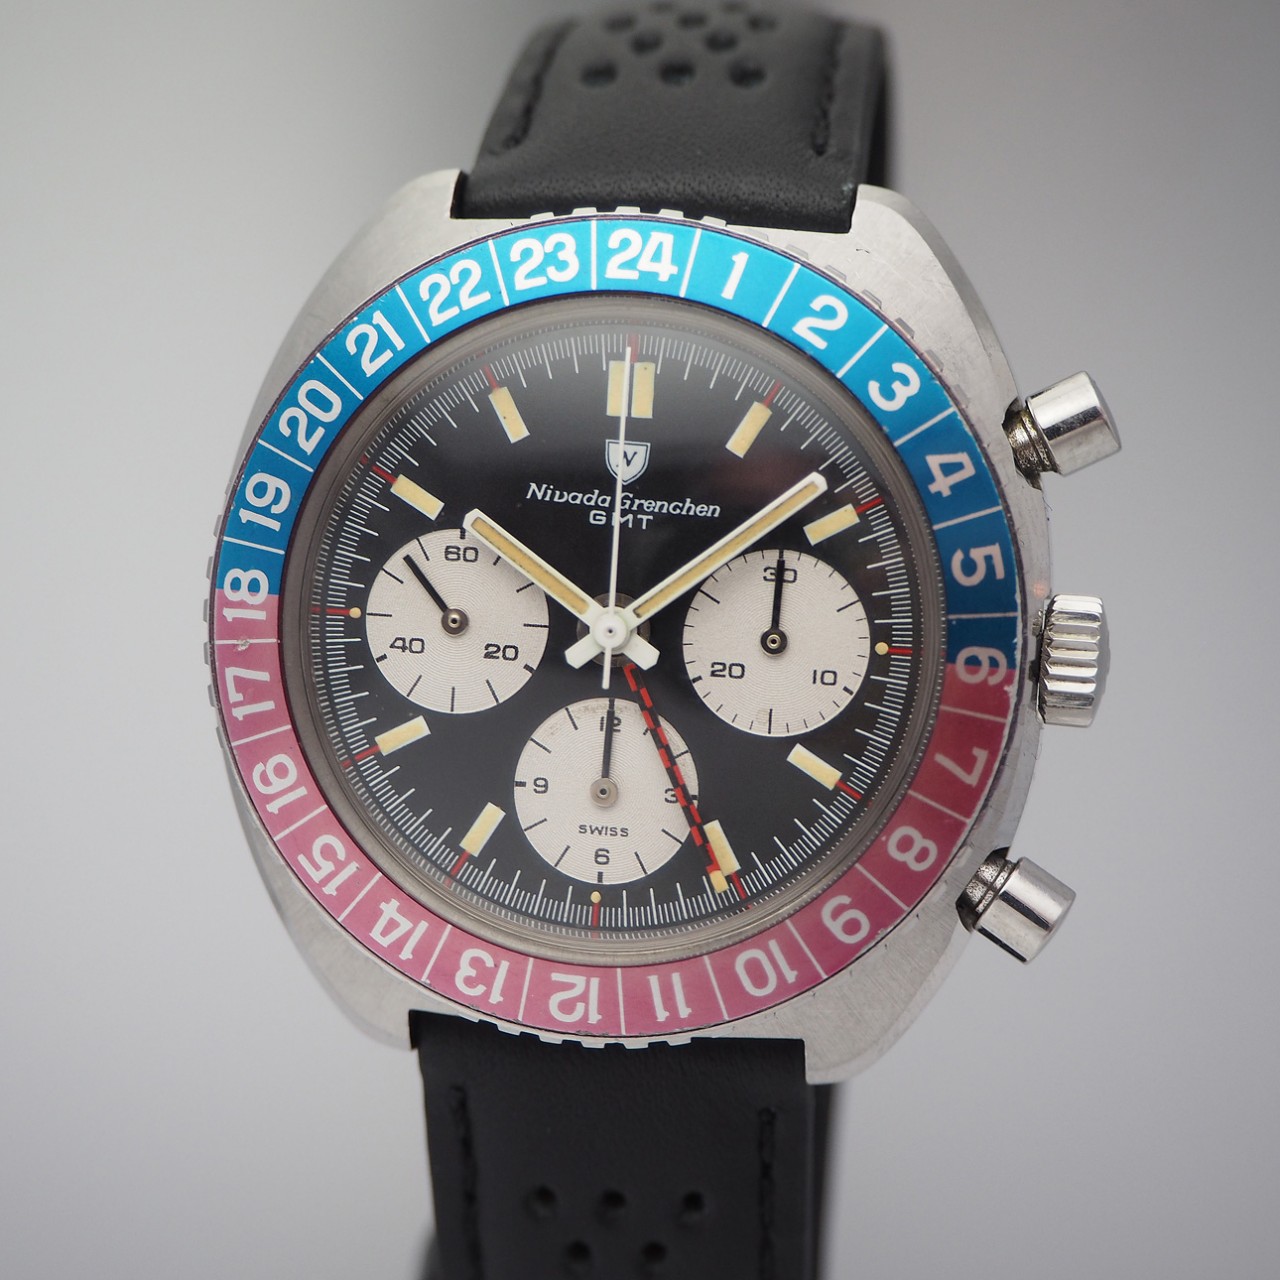 Nivada Grenchen GMT Chronograph &quot;Pepsi&quot; Valjoux 72,very rare